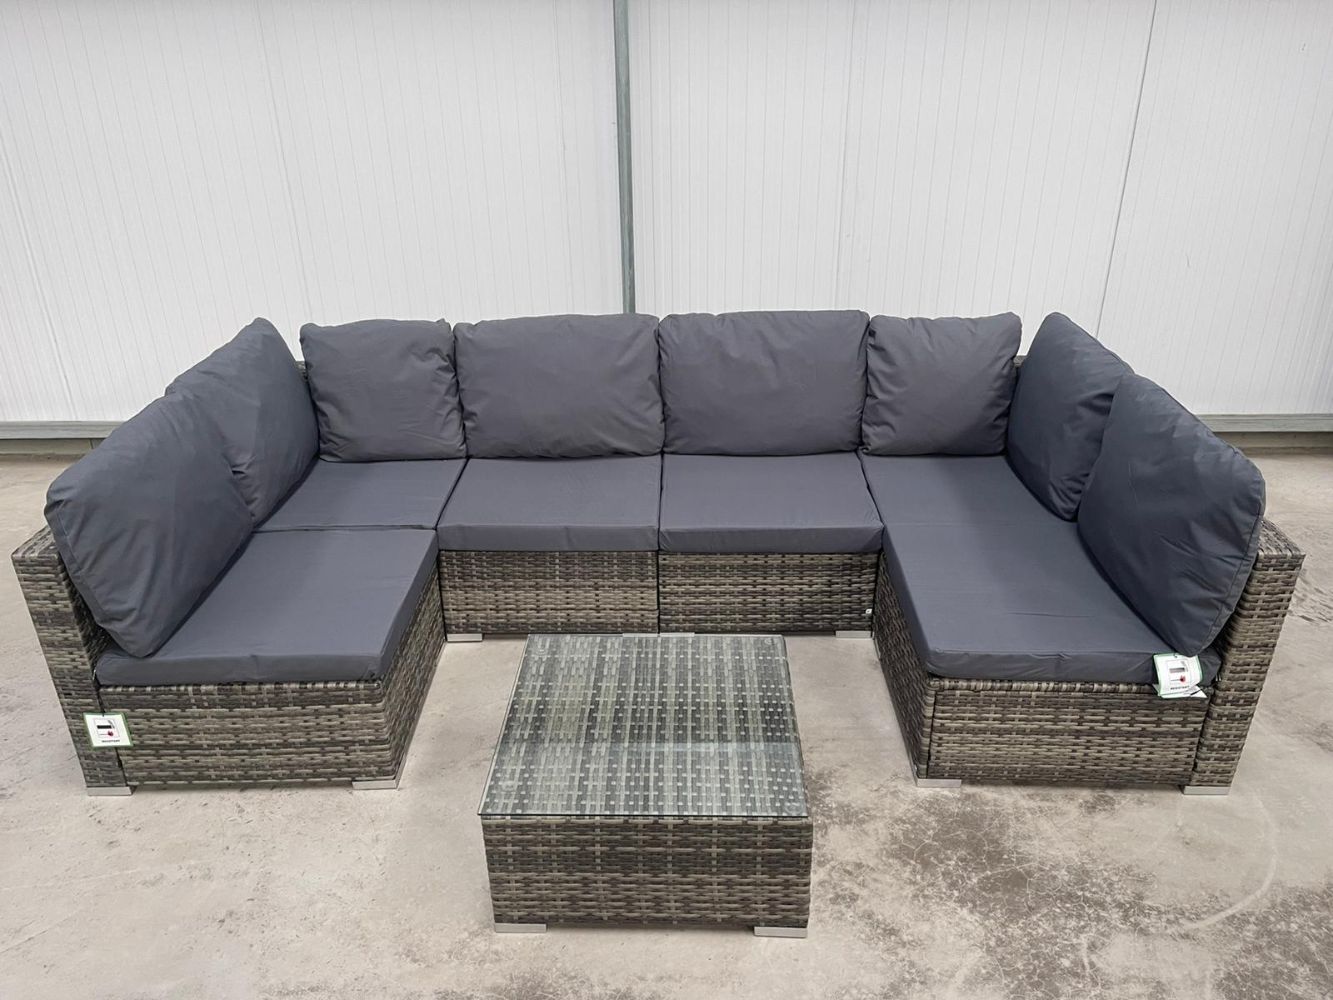 HUGE SAVINGS!!!! - RANGE OF BRAND NEW LUXURY RATTAN GARDEN FURNITURE, GAS HEATERS AND FIRE PITS. WAREHOUSE CLEARANCE! COME VIEW OUR SHOWROOM!